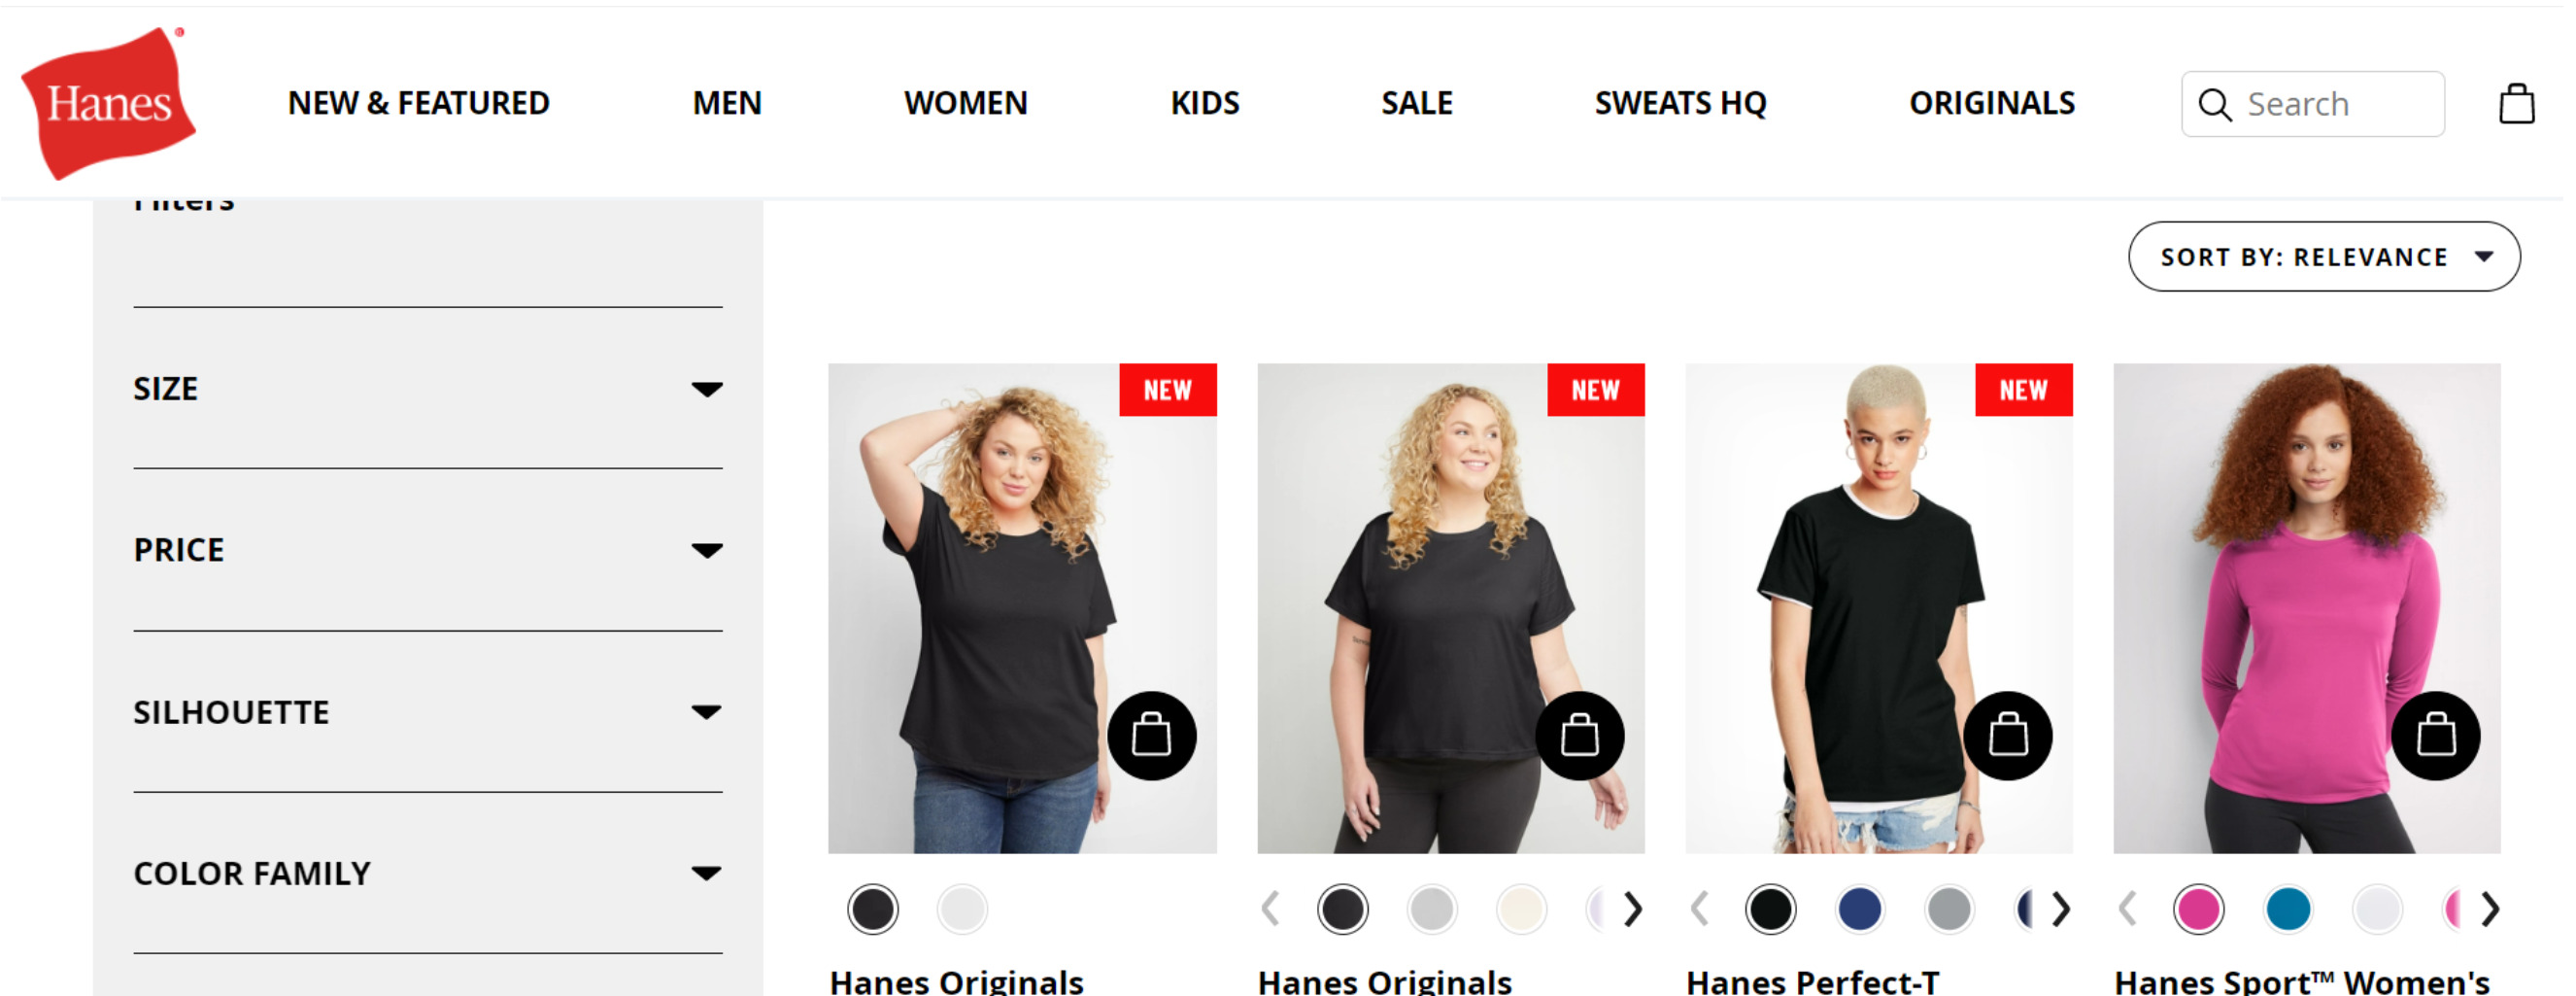 Different Hanes t-shirt styles for women. Photo taken from Hanes’ official website.